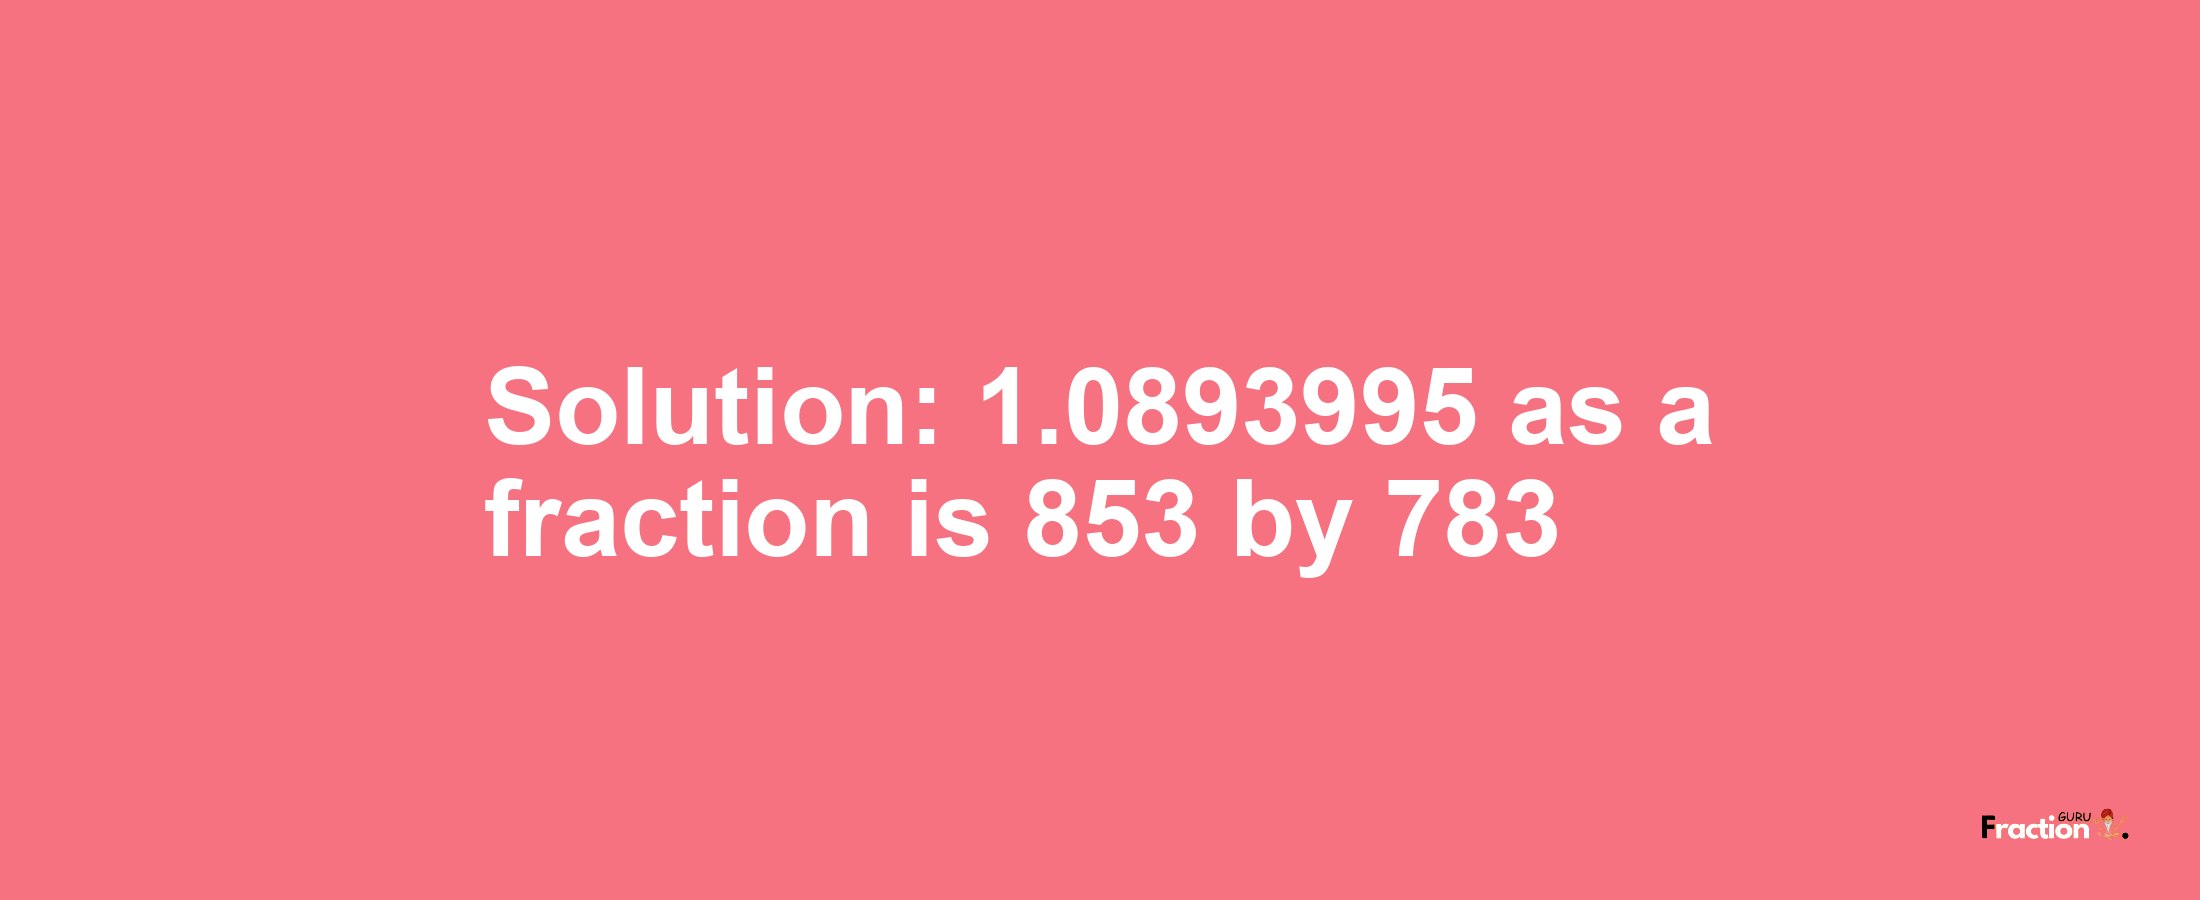 Solution:1.0893995 as a fraction is 853/783